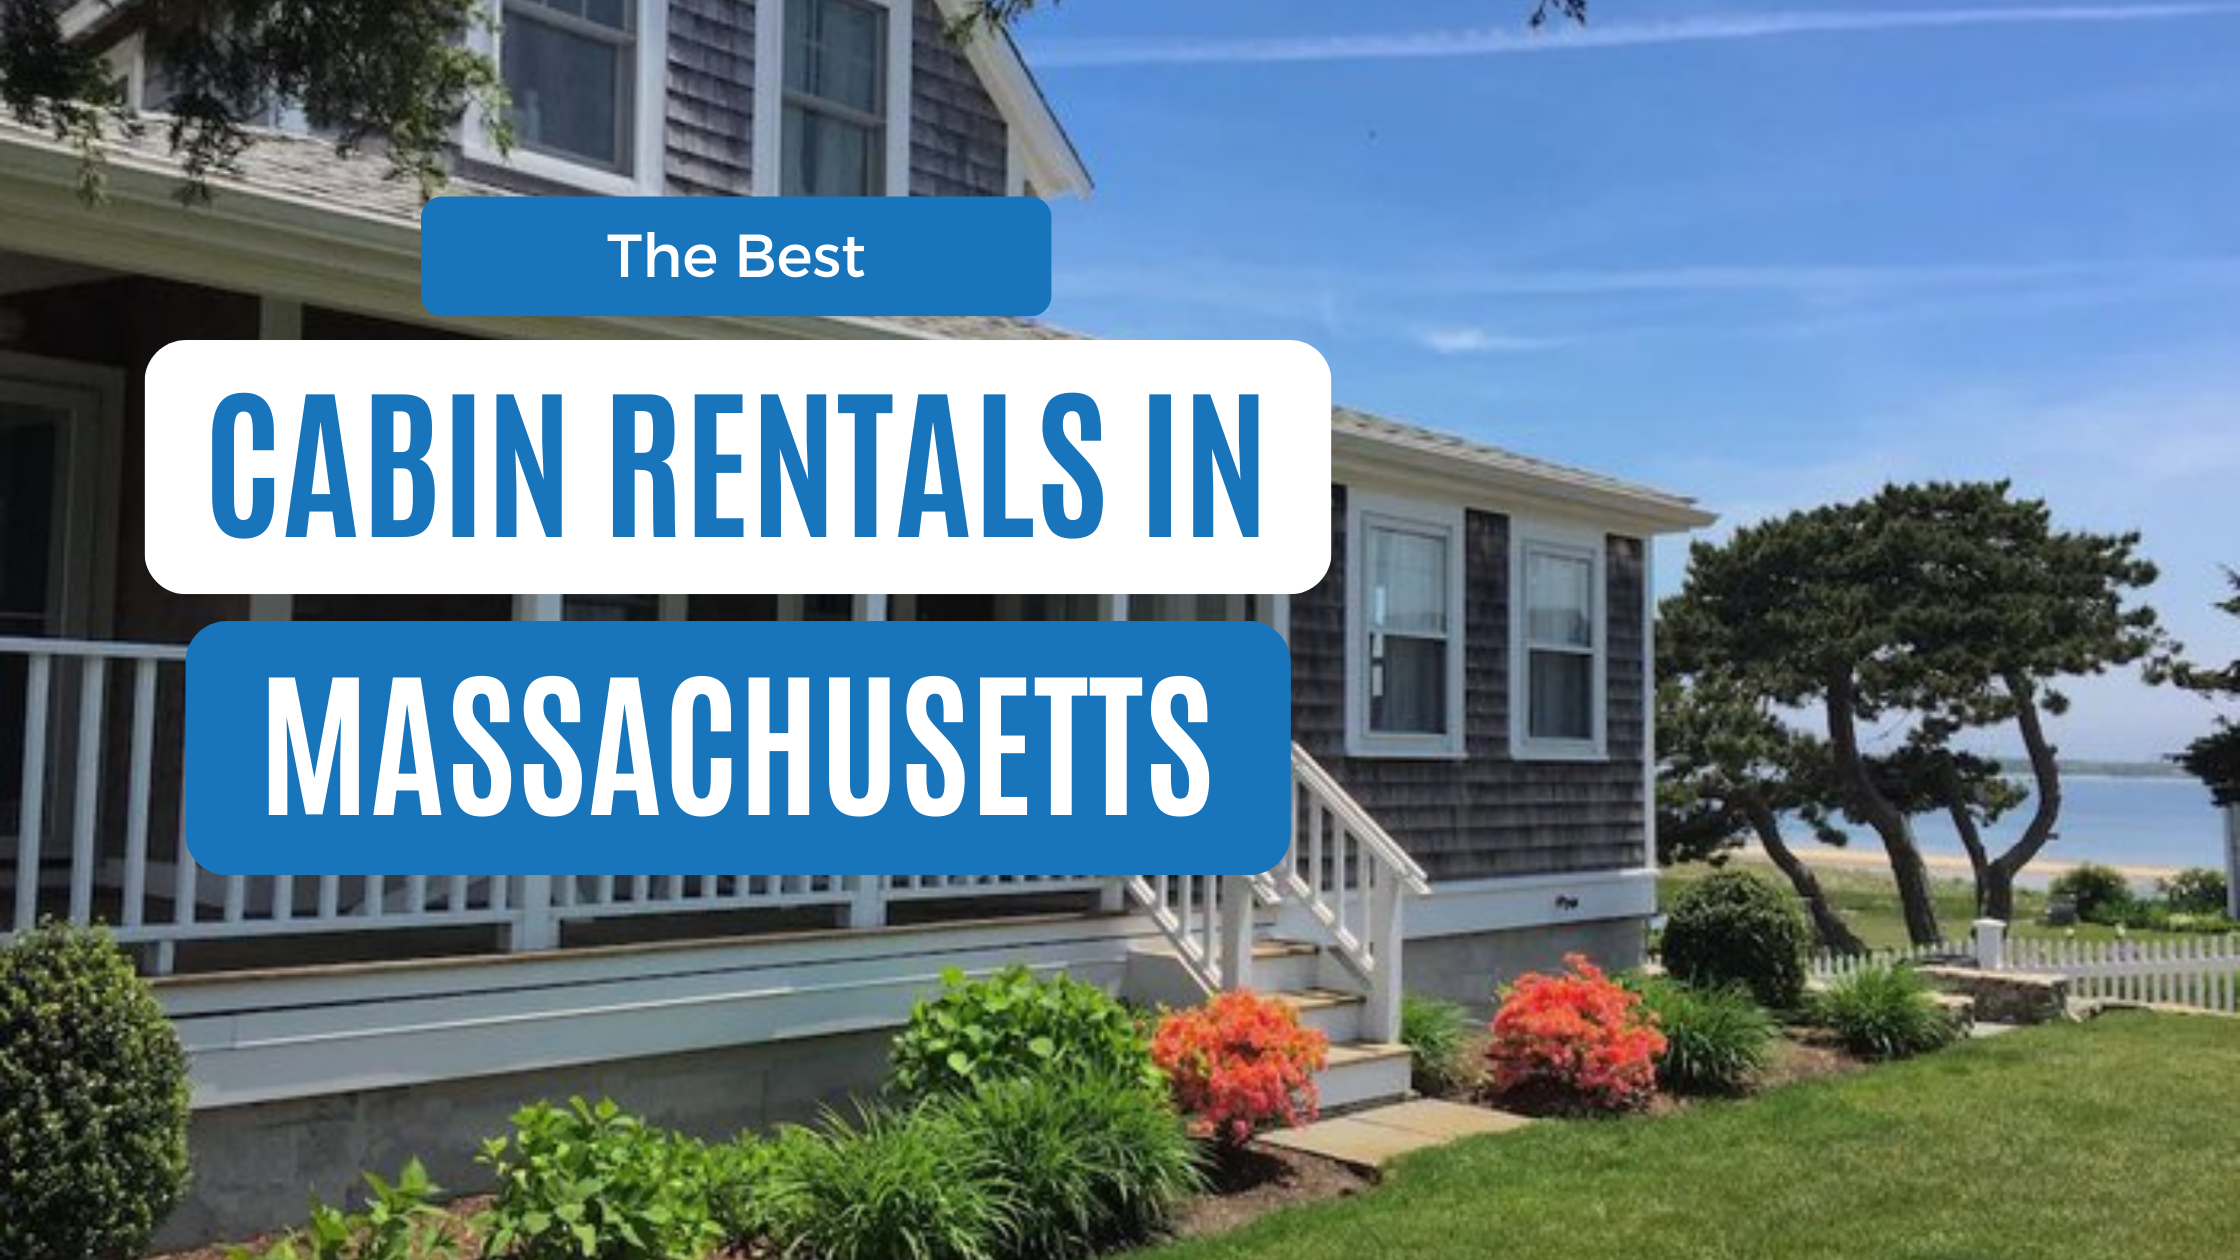 Best Cabins In Massachusetts: 12 Cozy Rentals for Every Budget